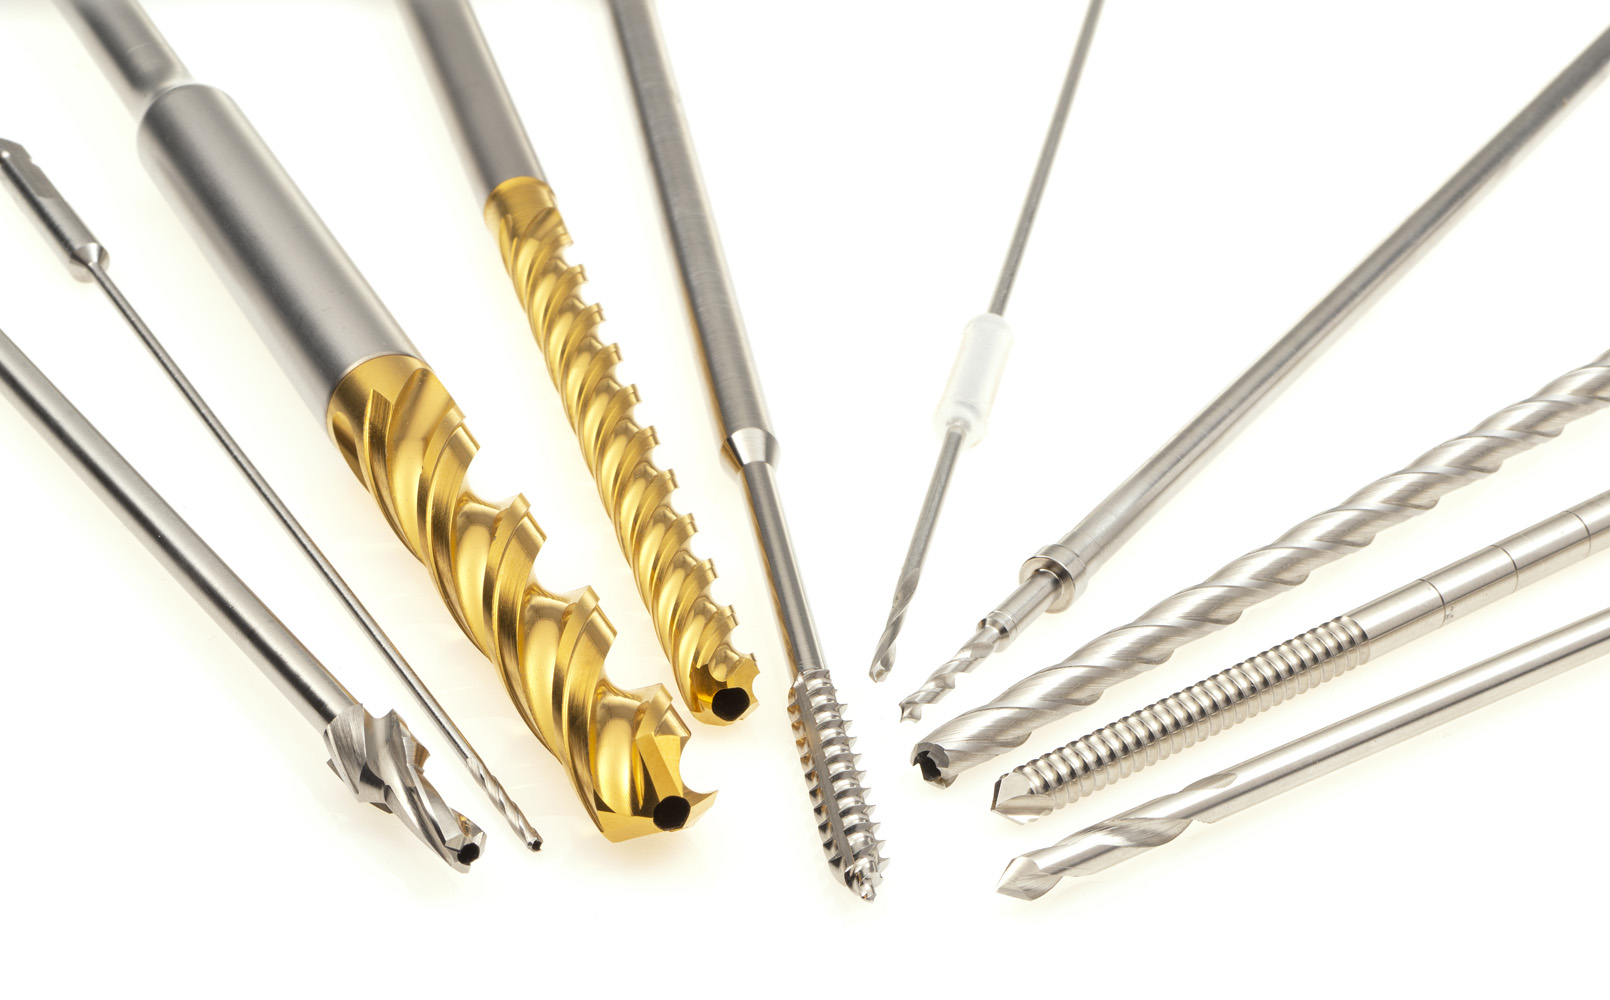 Tight tolerance surgical cutting tools